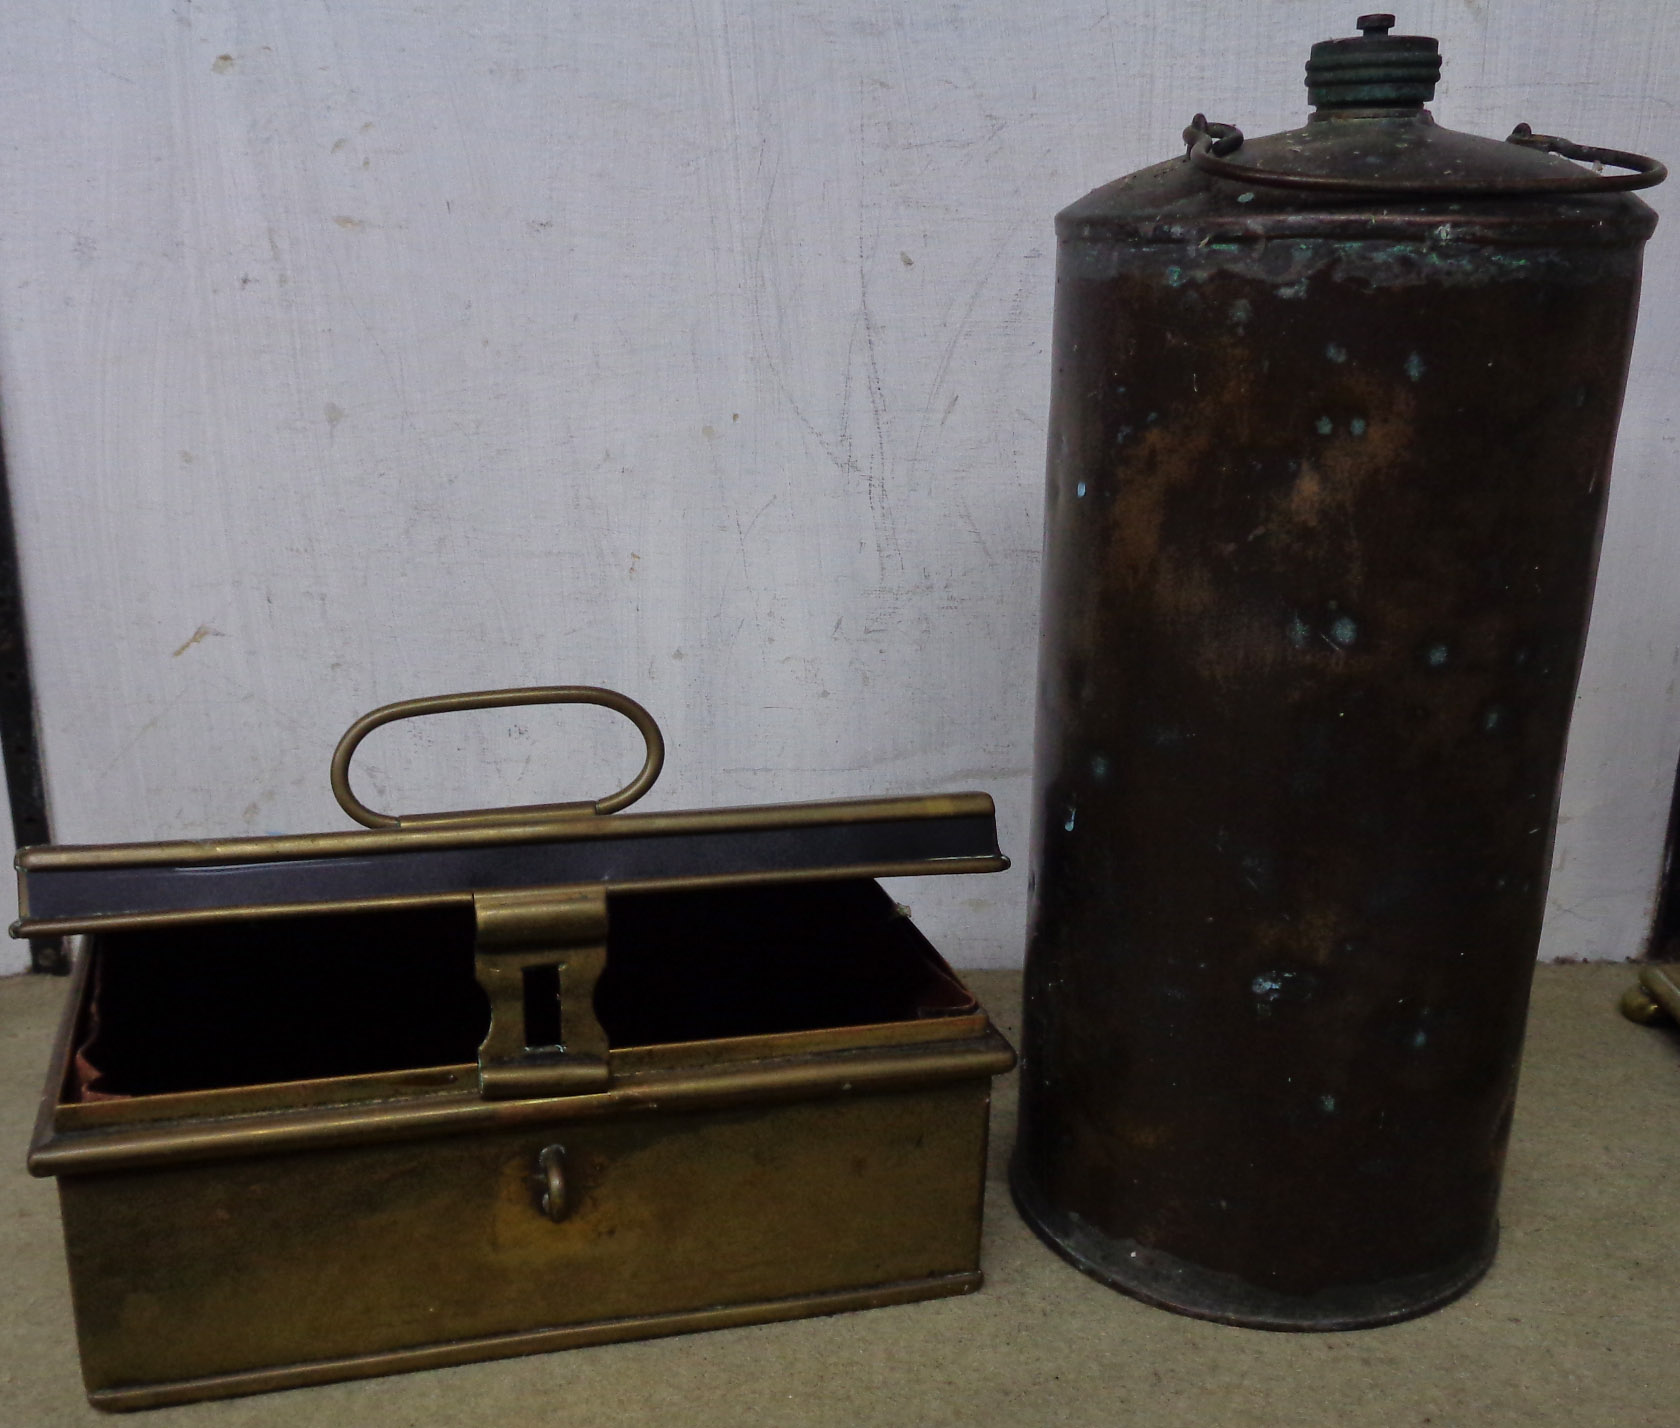 A copper cash tin and a copper hot water bottle with release valve lid